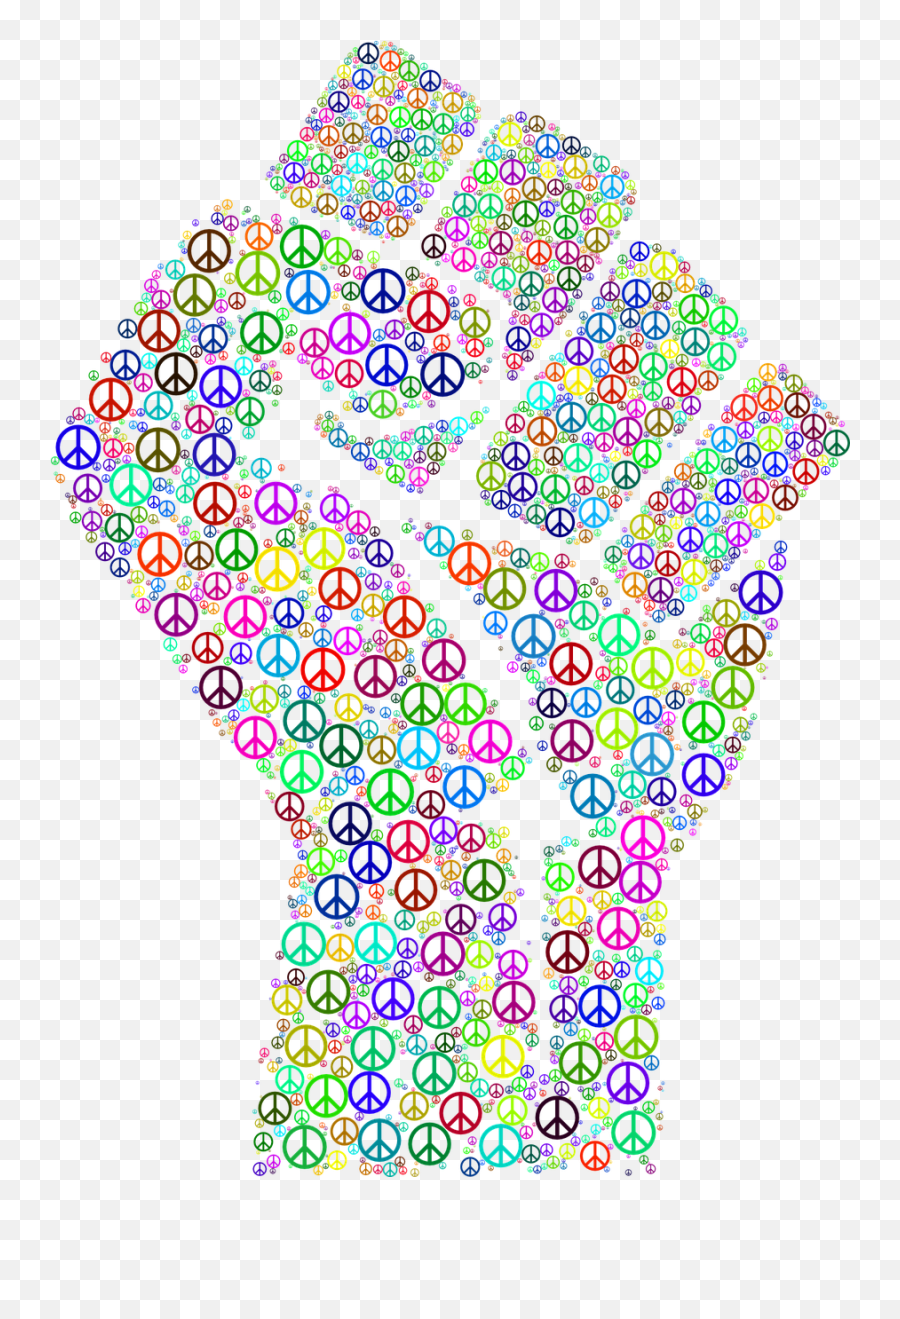 Fist Hand Clenched Fingers Peace - Colorful Fist Emoji,Lightning Hammer Arm Emoji